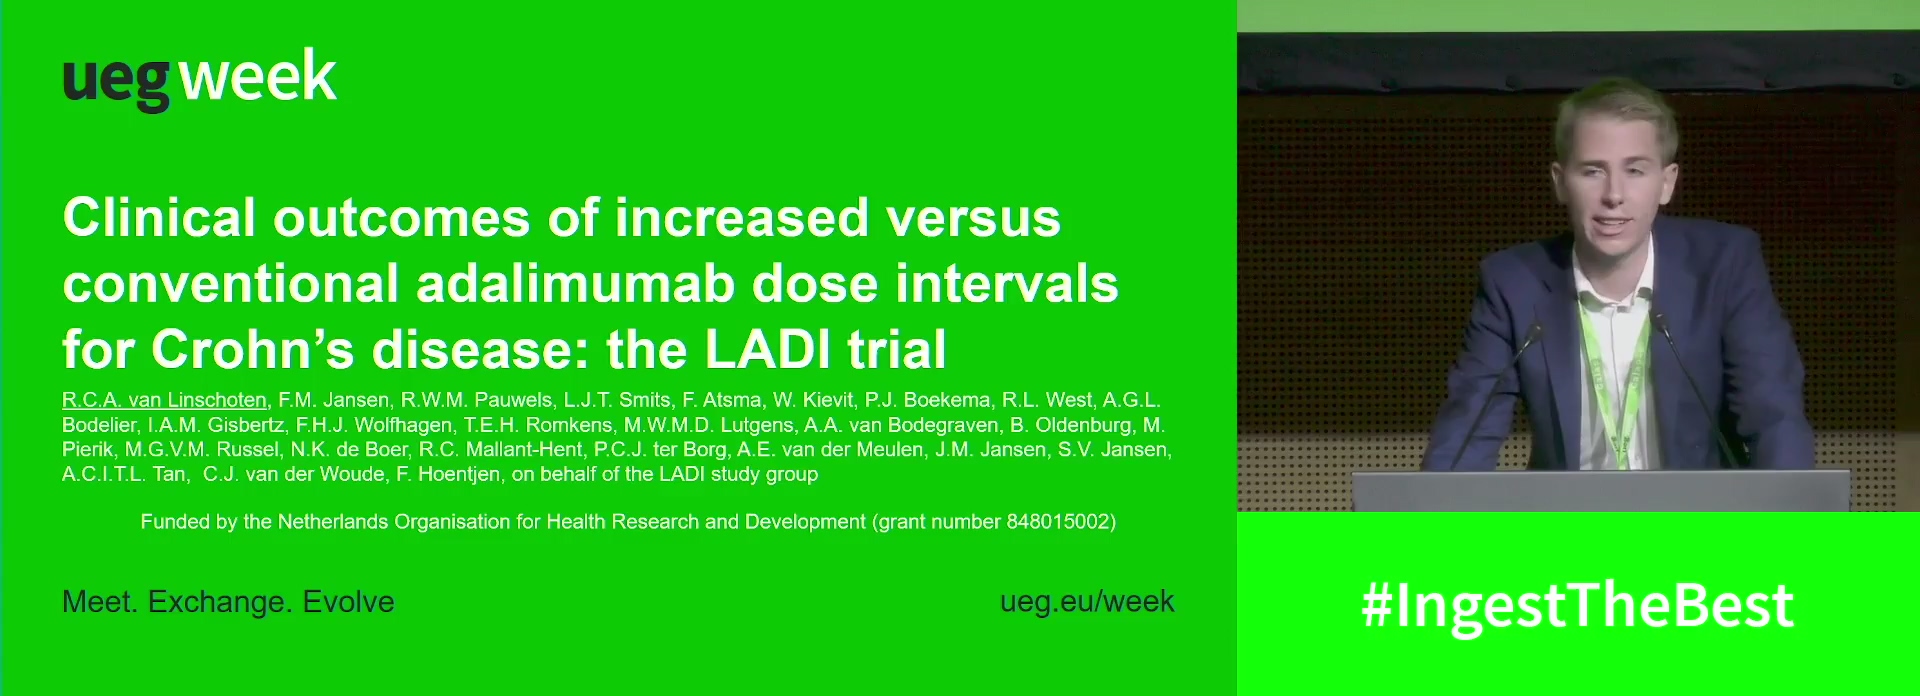 CLINICAL OUTCOMES OF INCREASED VERSUS CONVENTIONAL ADALIMUMAB DOSE INTERVALS IN PATIENTS WITH CROHN’S DISEASE IN STABLE REMISSION: THE RANDOMISED CONTROLLED LADI TRIAL